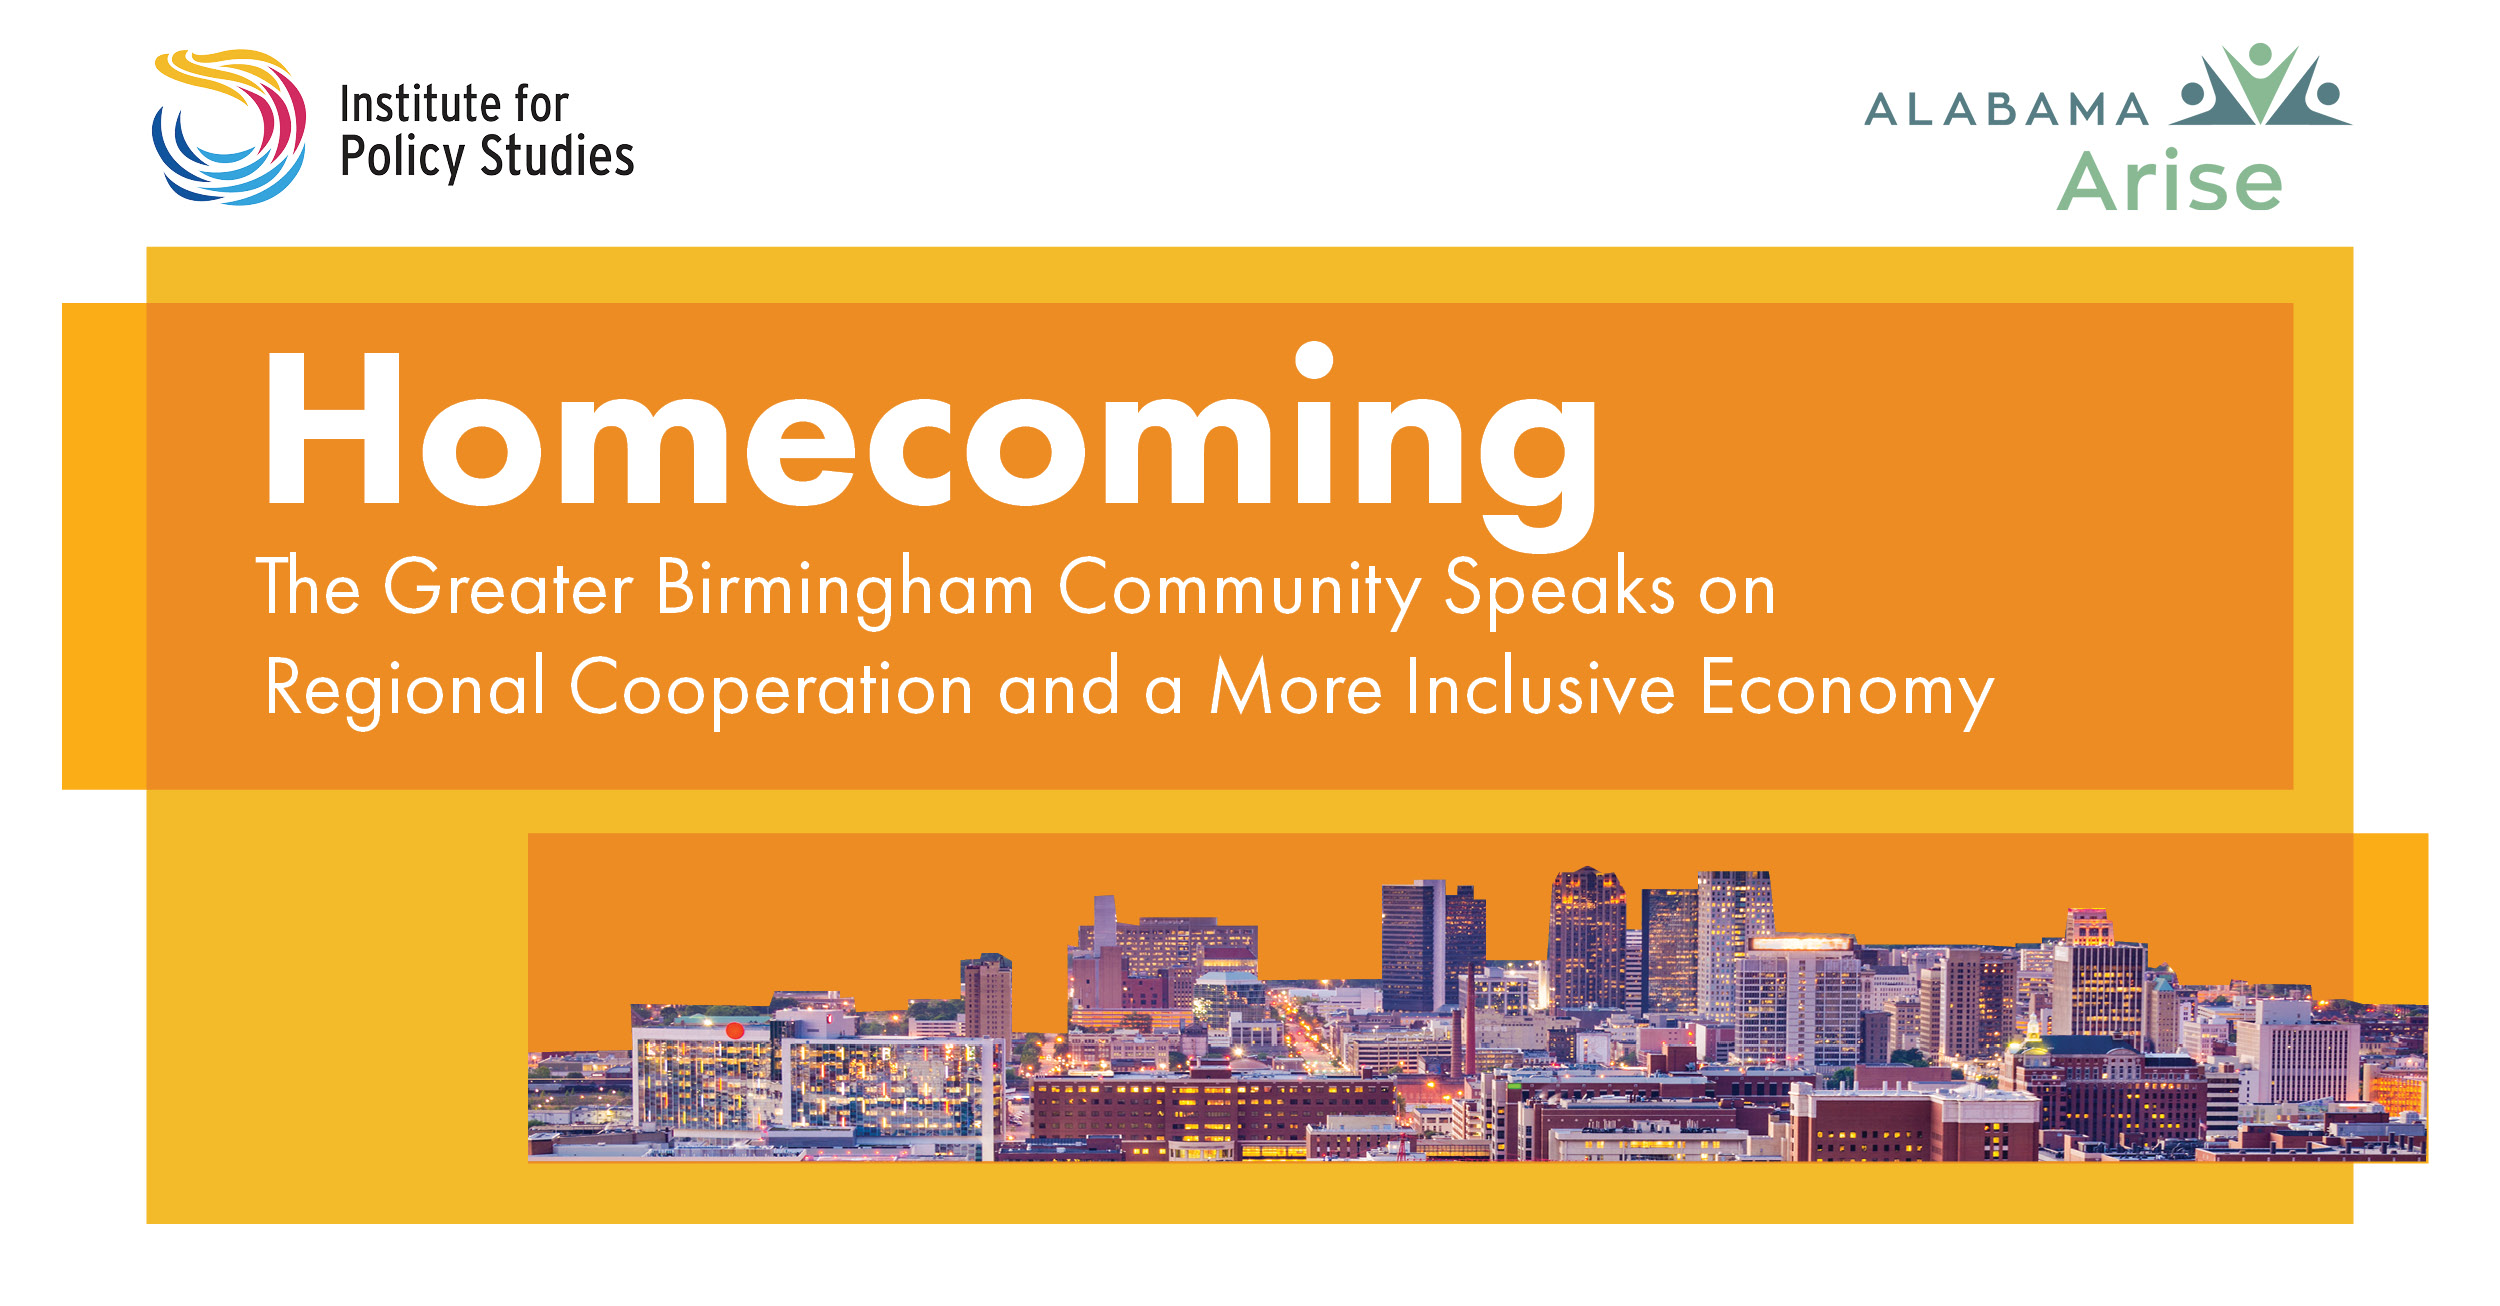 REPORT: Homecoming: The Greater Birmingham Community Speaks on Regional Cooperation and a More Inclusive Economy